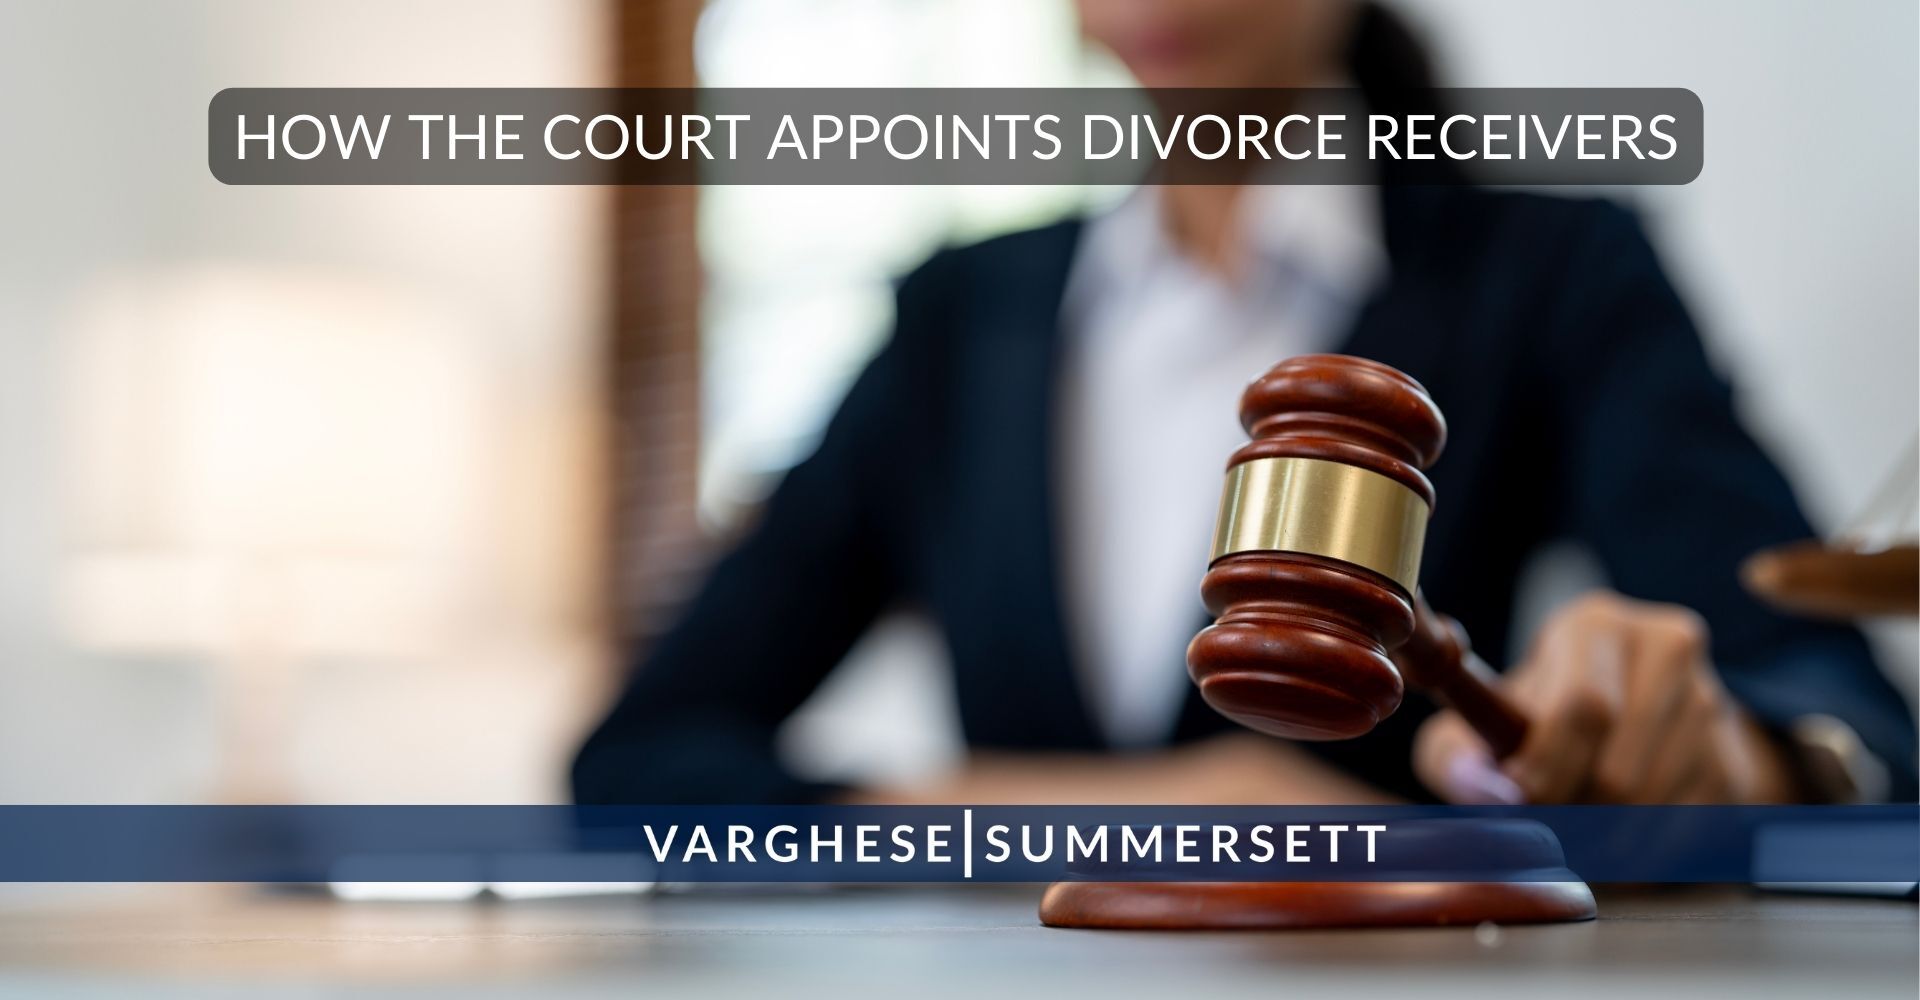 How the court appoints divorce receivers